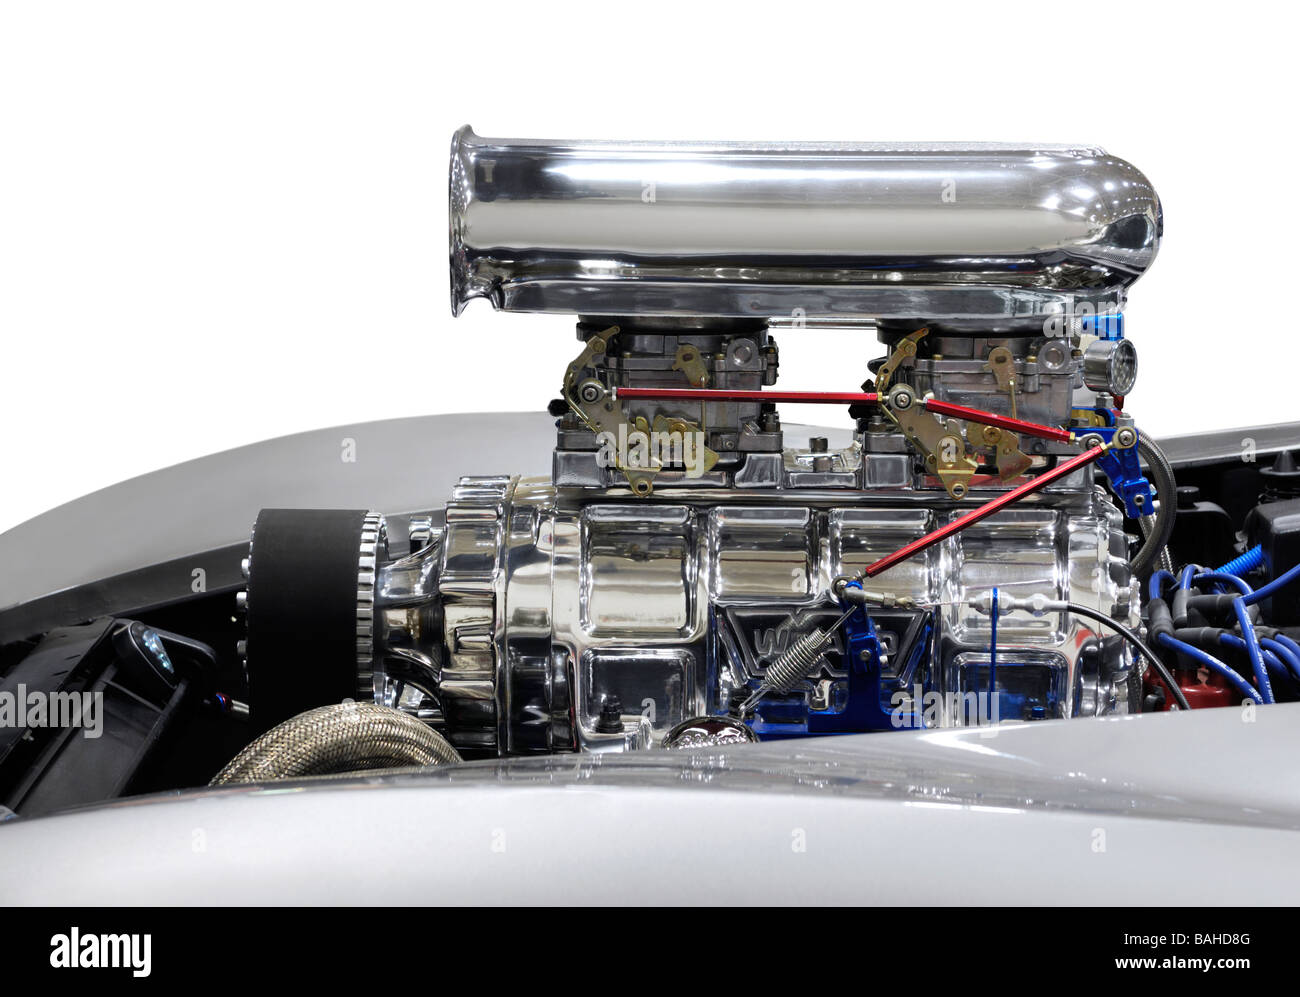 License available at MaximImages.com - Powerful custom drag race muscle car engine Stock Photo